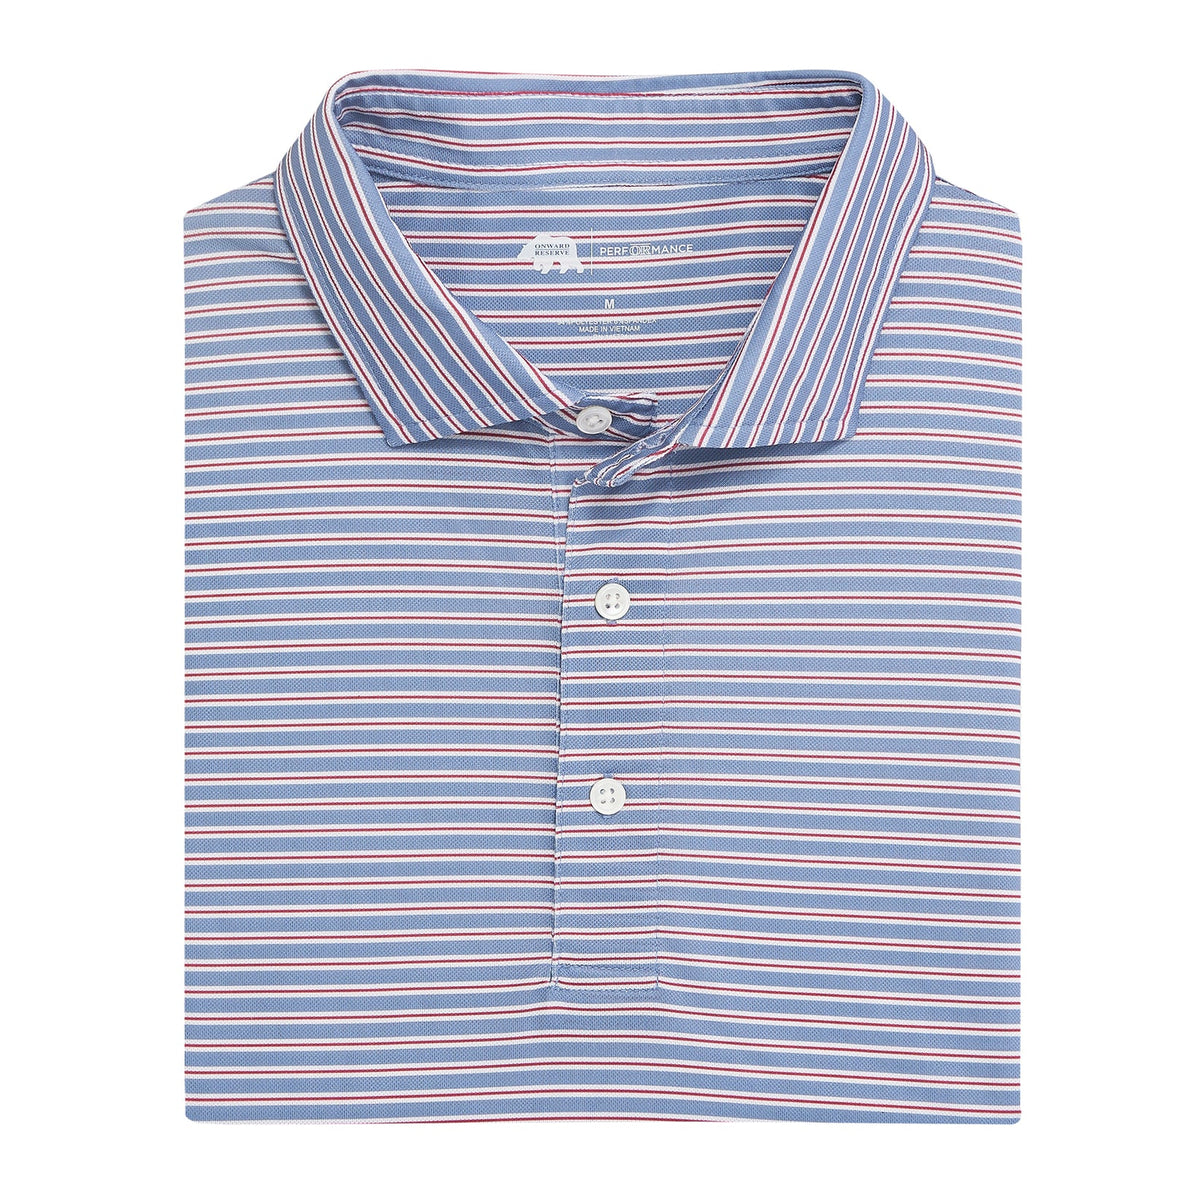 Onward Reserve Match Stripe Performance Pique Polo - Country Blue